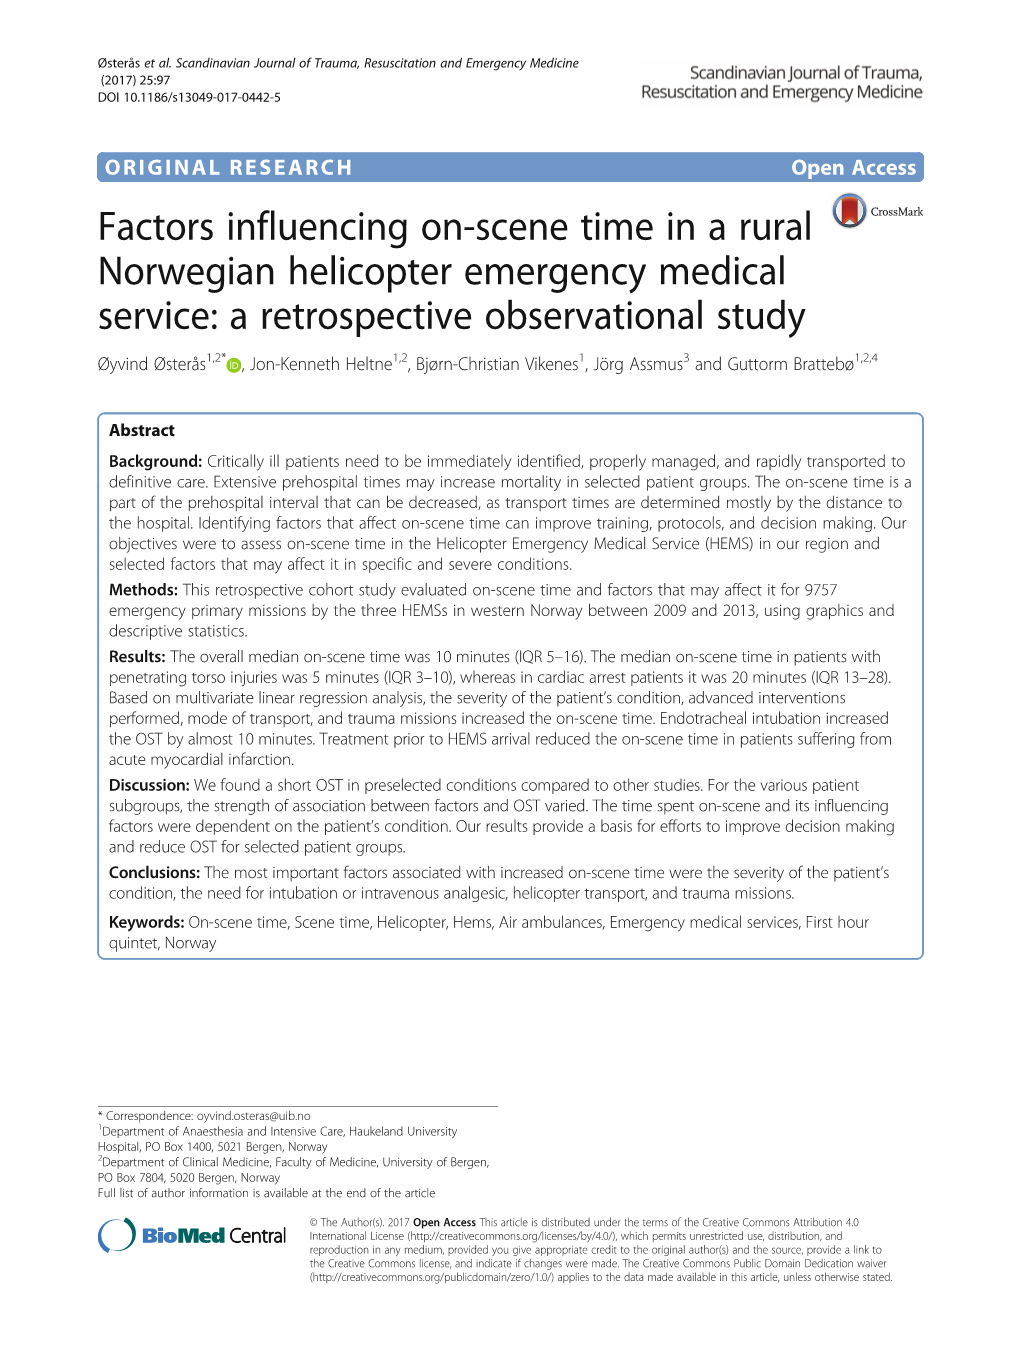 Factors Influencing On-Scene Time in a Rural Norwegian Helicopter Emergency Medical Service: a Retrospective Observational Study